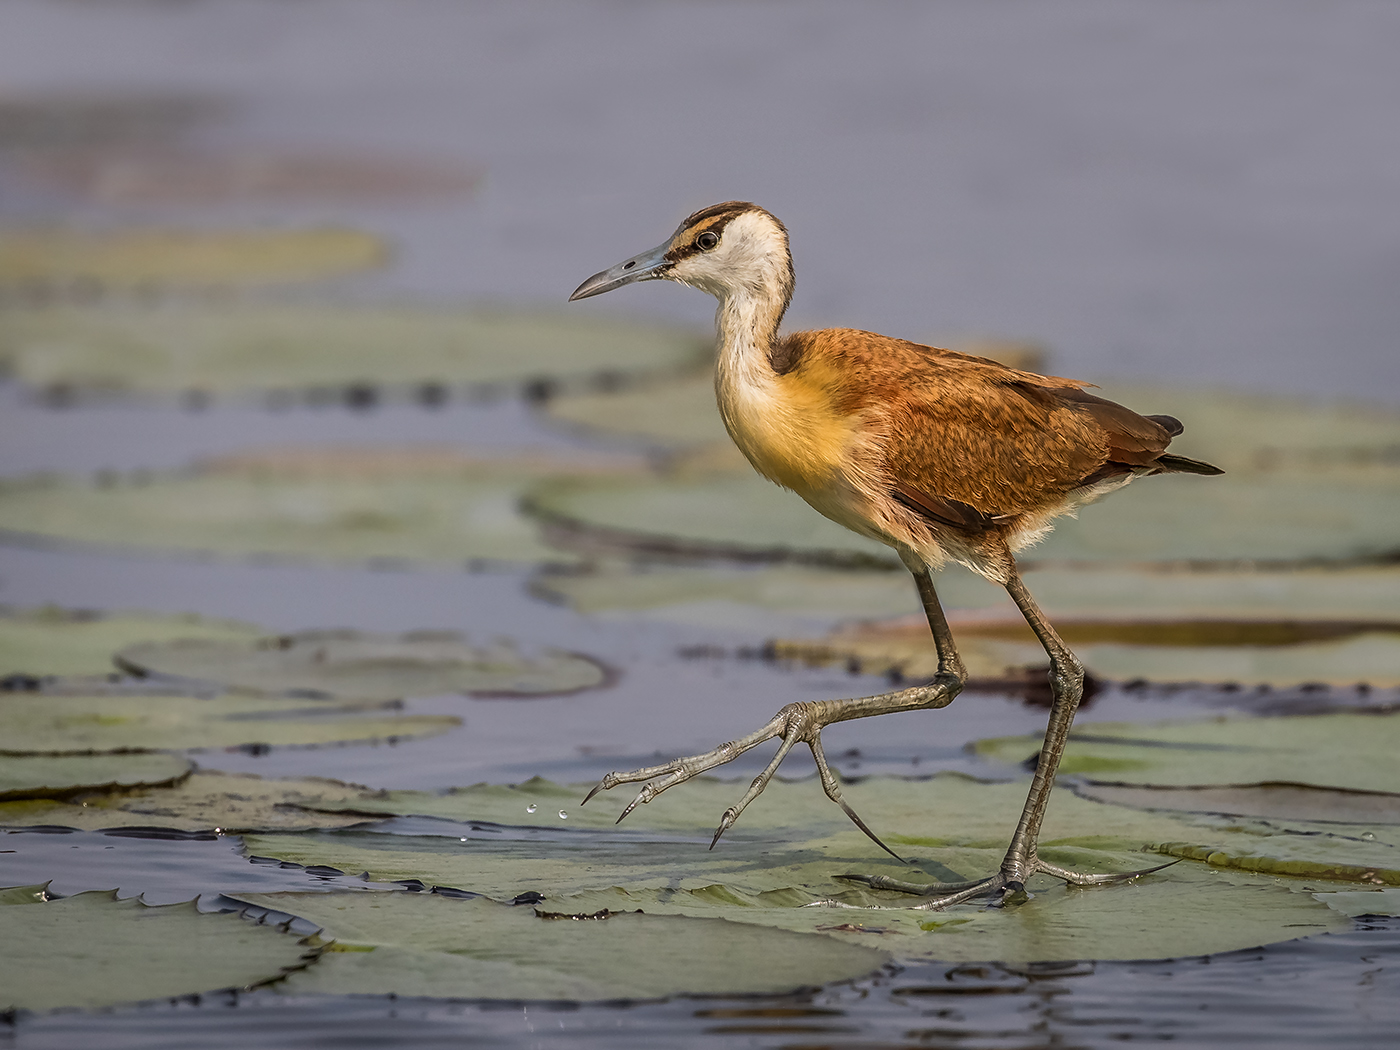 Juvenile African Jacana on Lily Pad by Conor Molloy